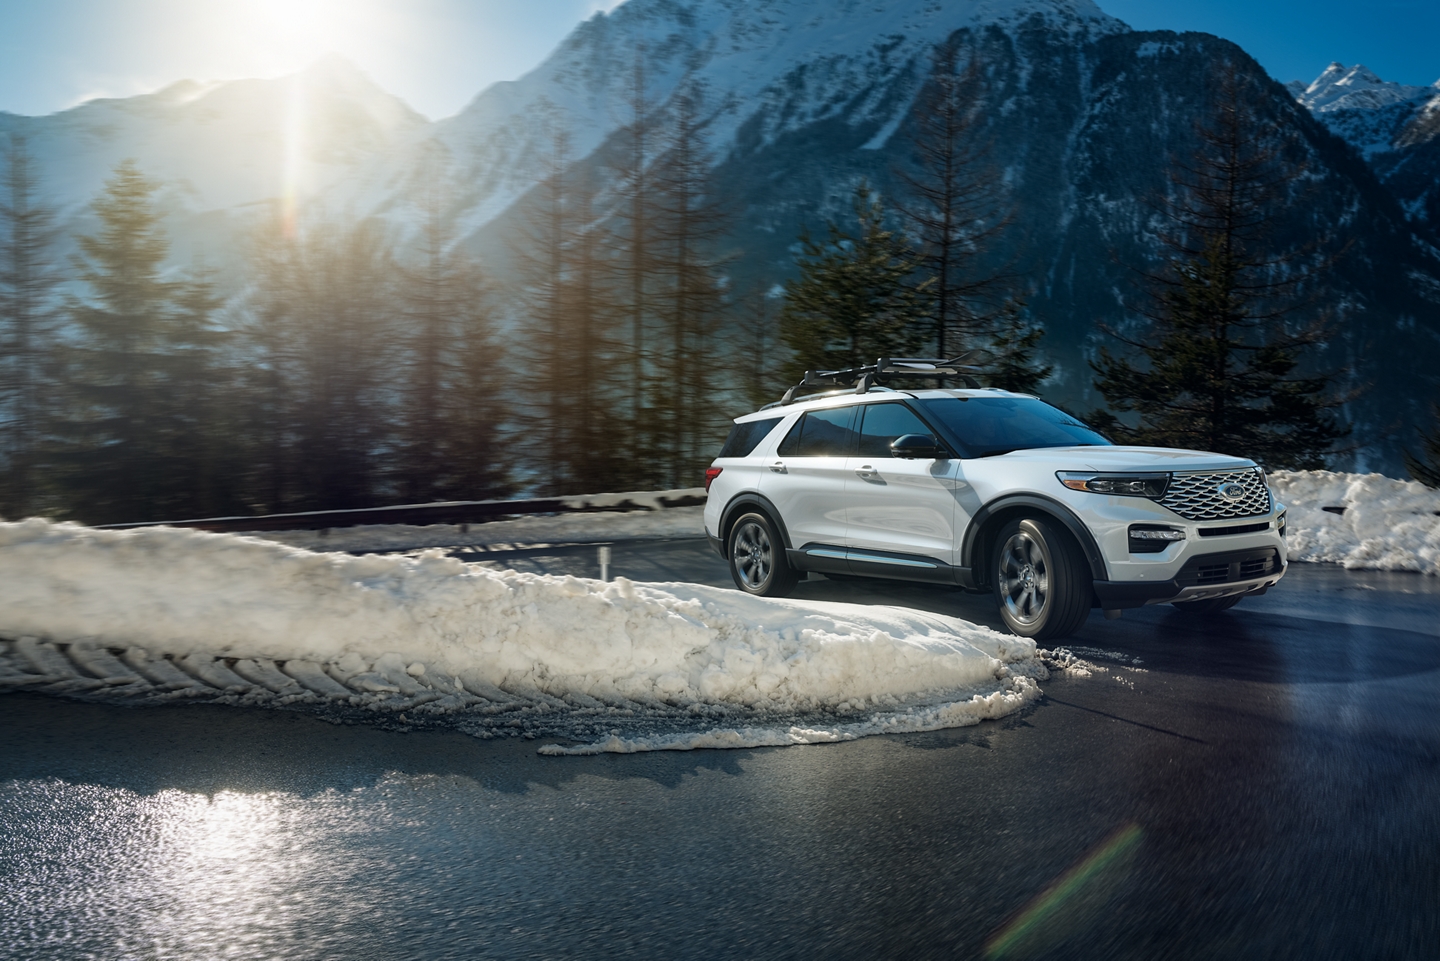 2021 Ford Explorer Pricing Starting at $44,549 | Freedom Ford Edmonton